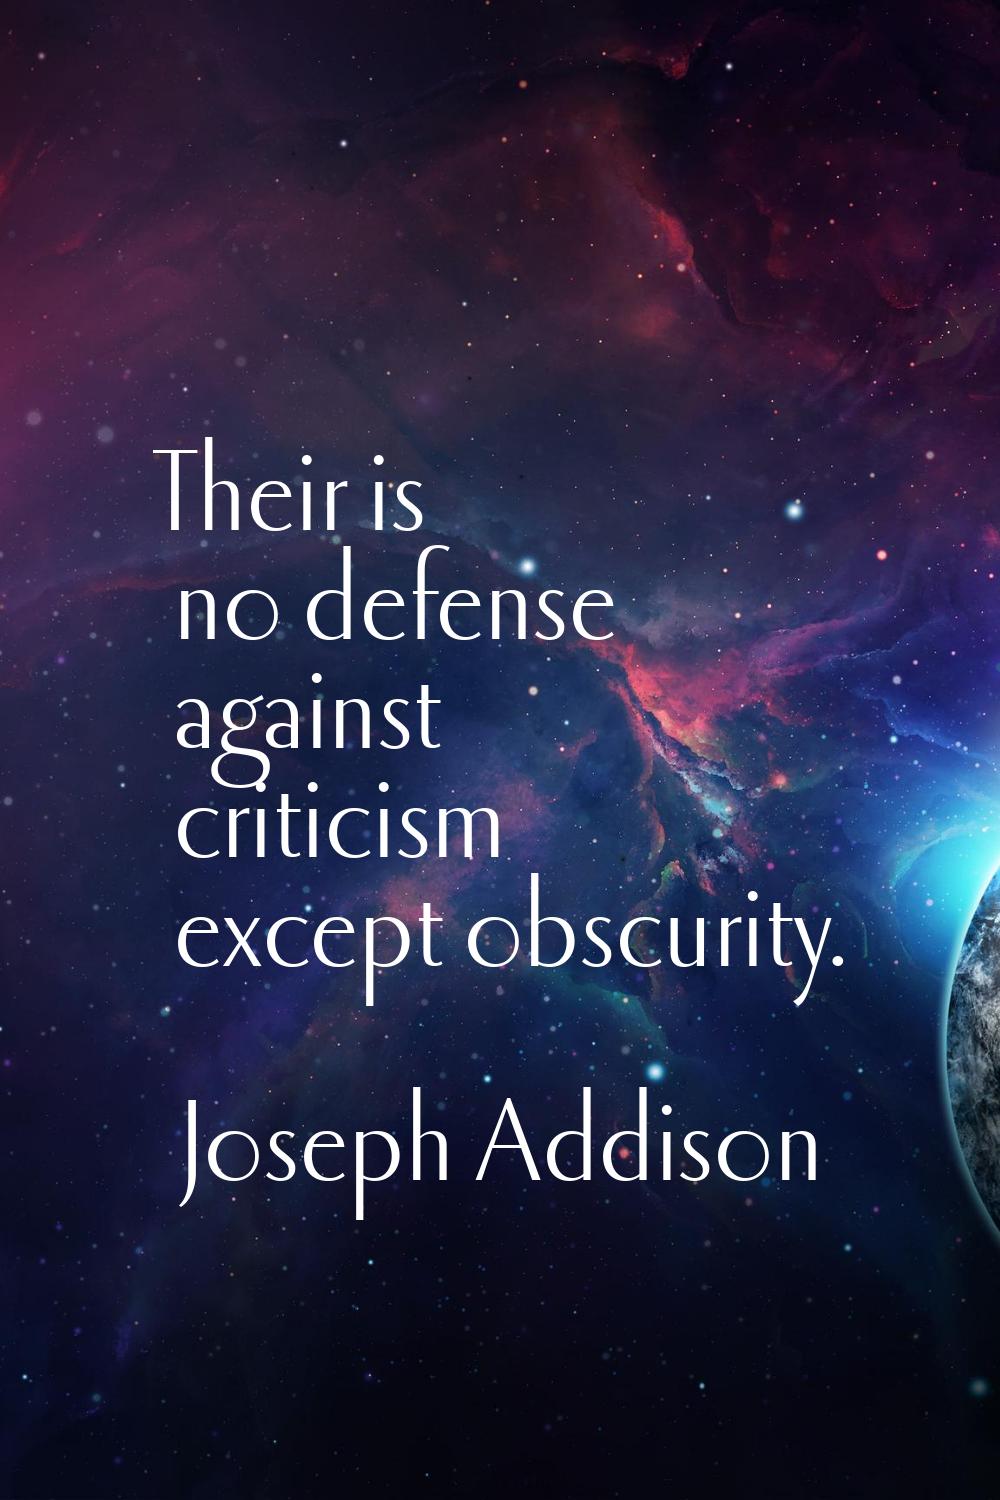 Their is no defense against criticism except obscurity.